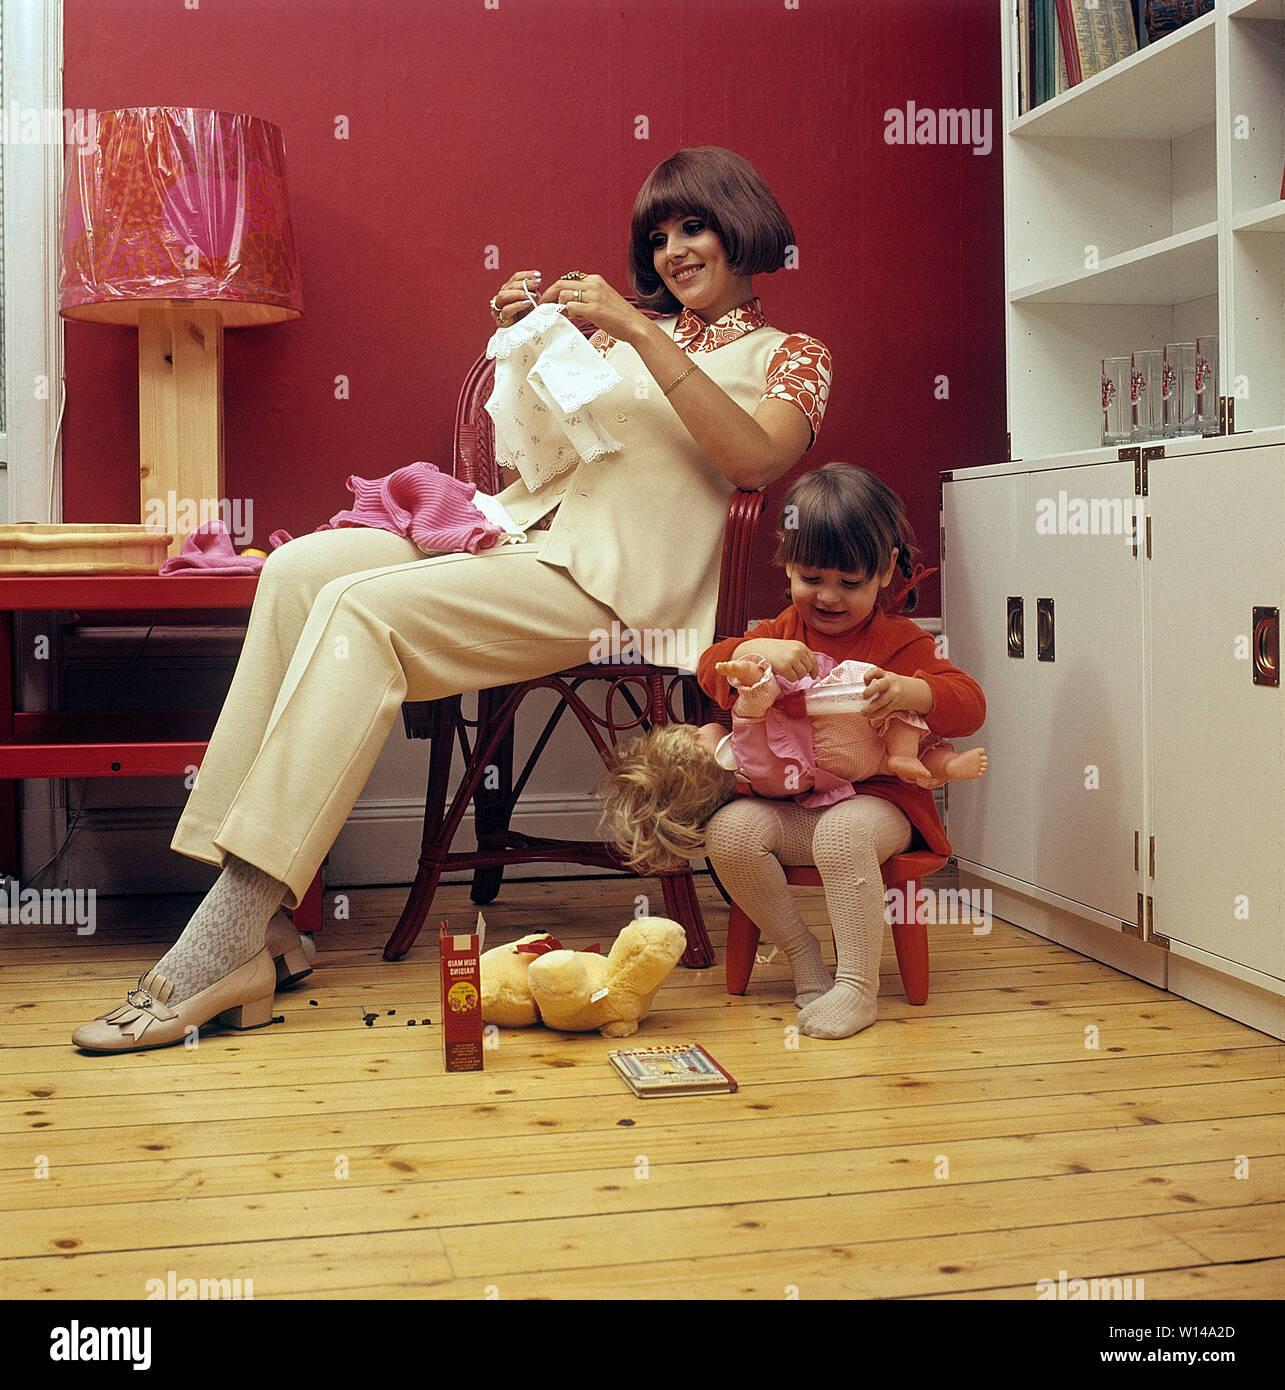 1960s mother. A young woman with her daughter are playing together with her doll. Sweden 1964 Stock Photo